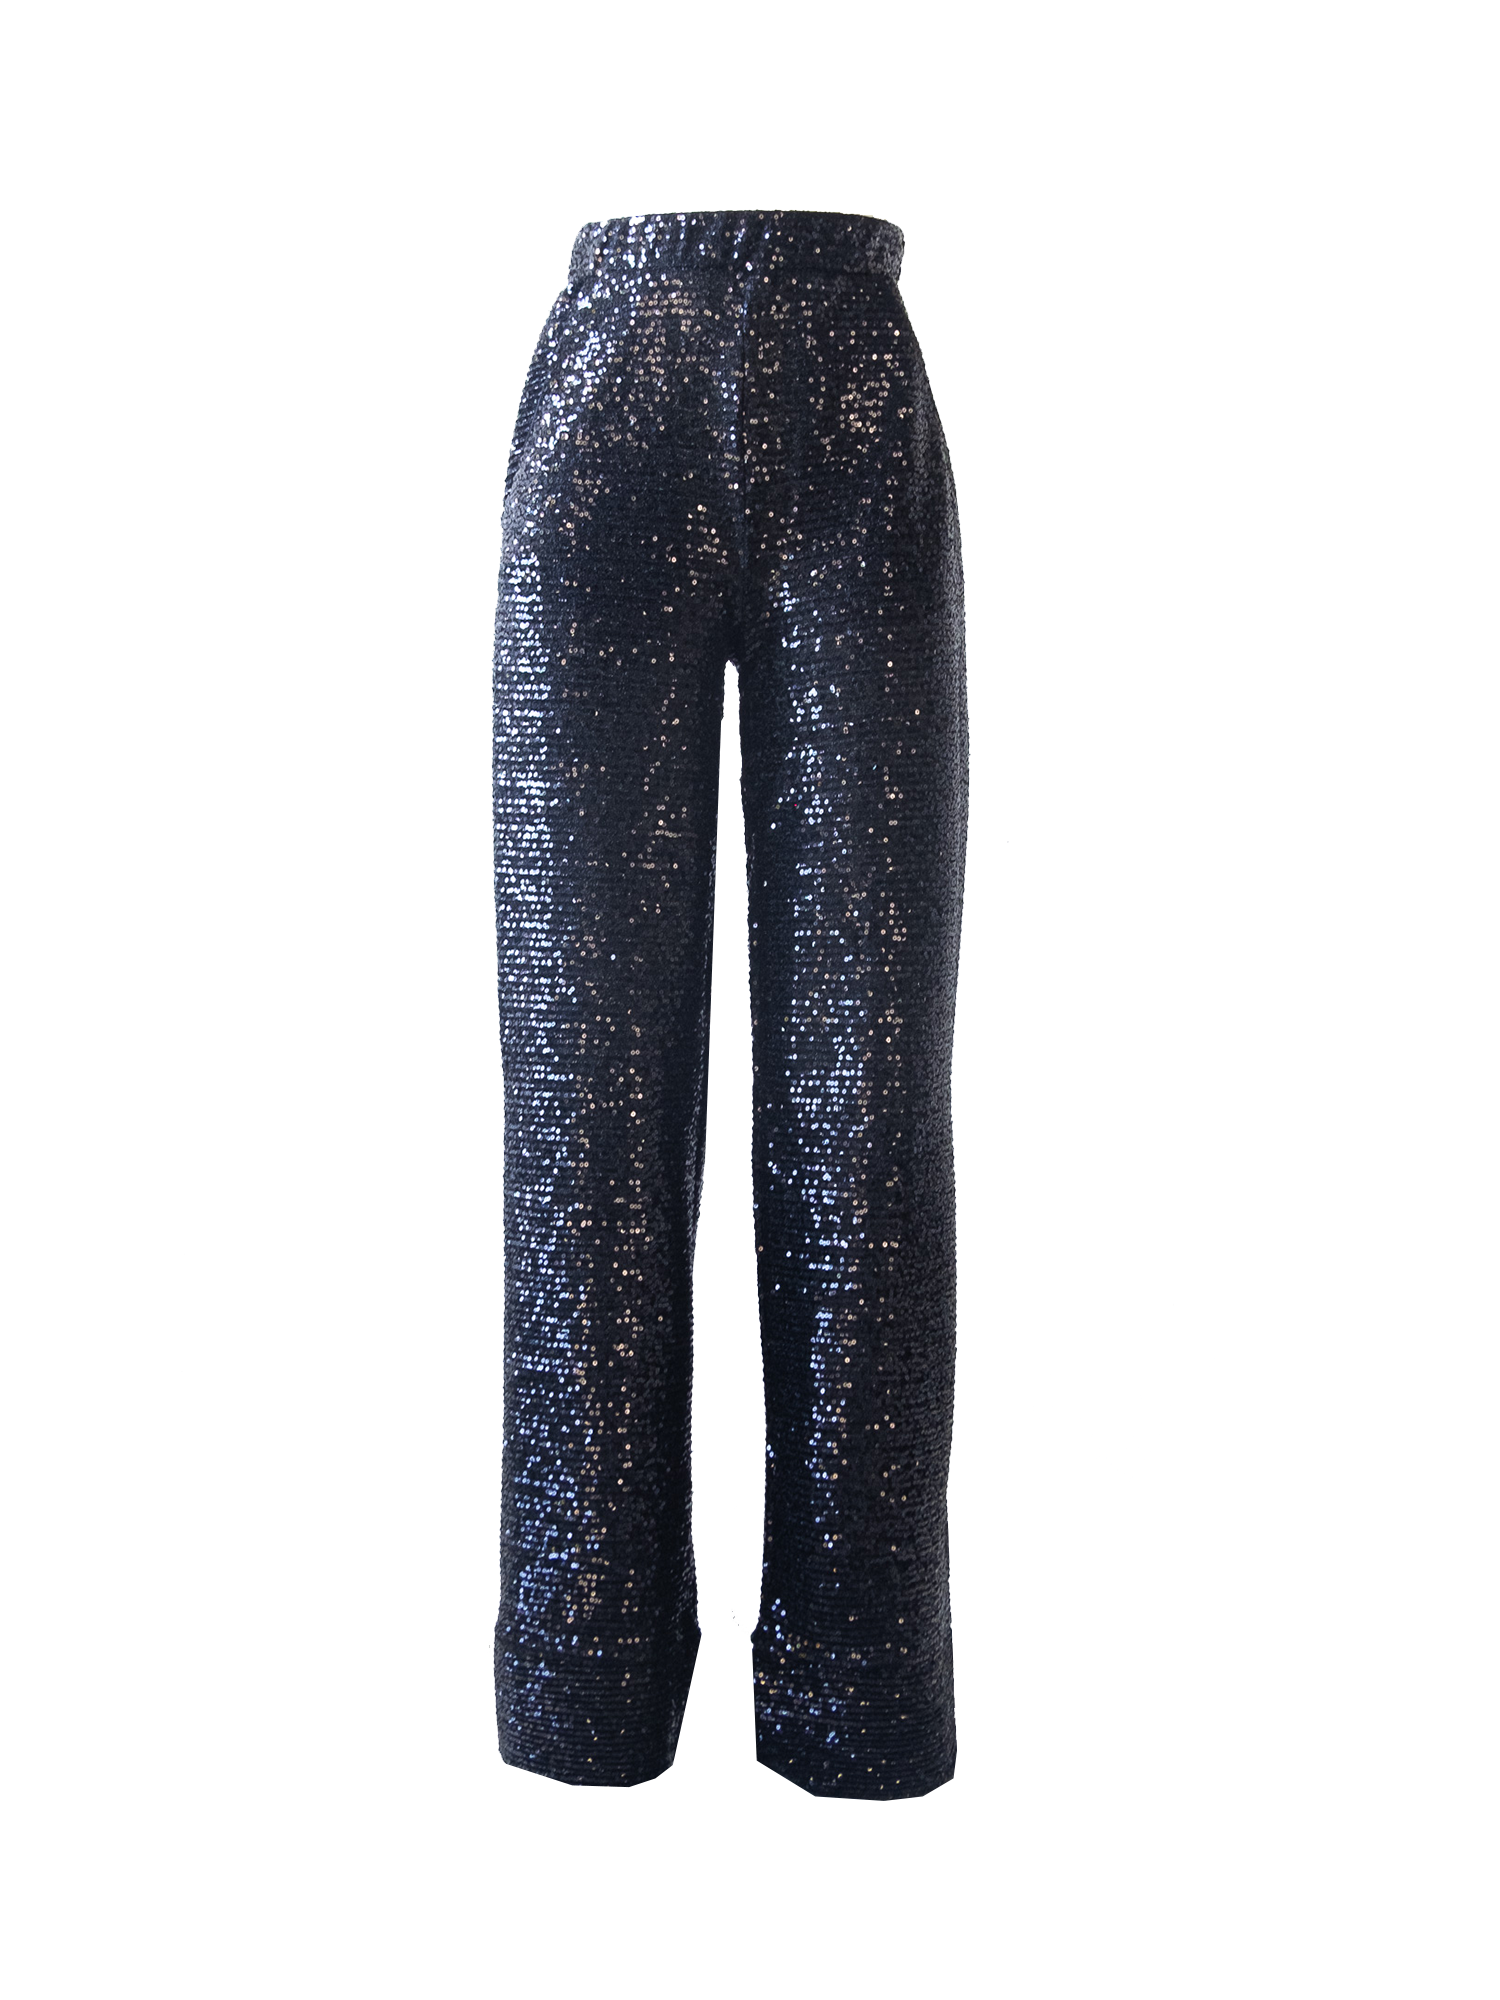 AIDA - palazzo trousers with side pockets in black sequin